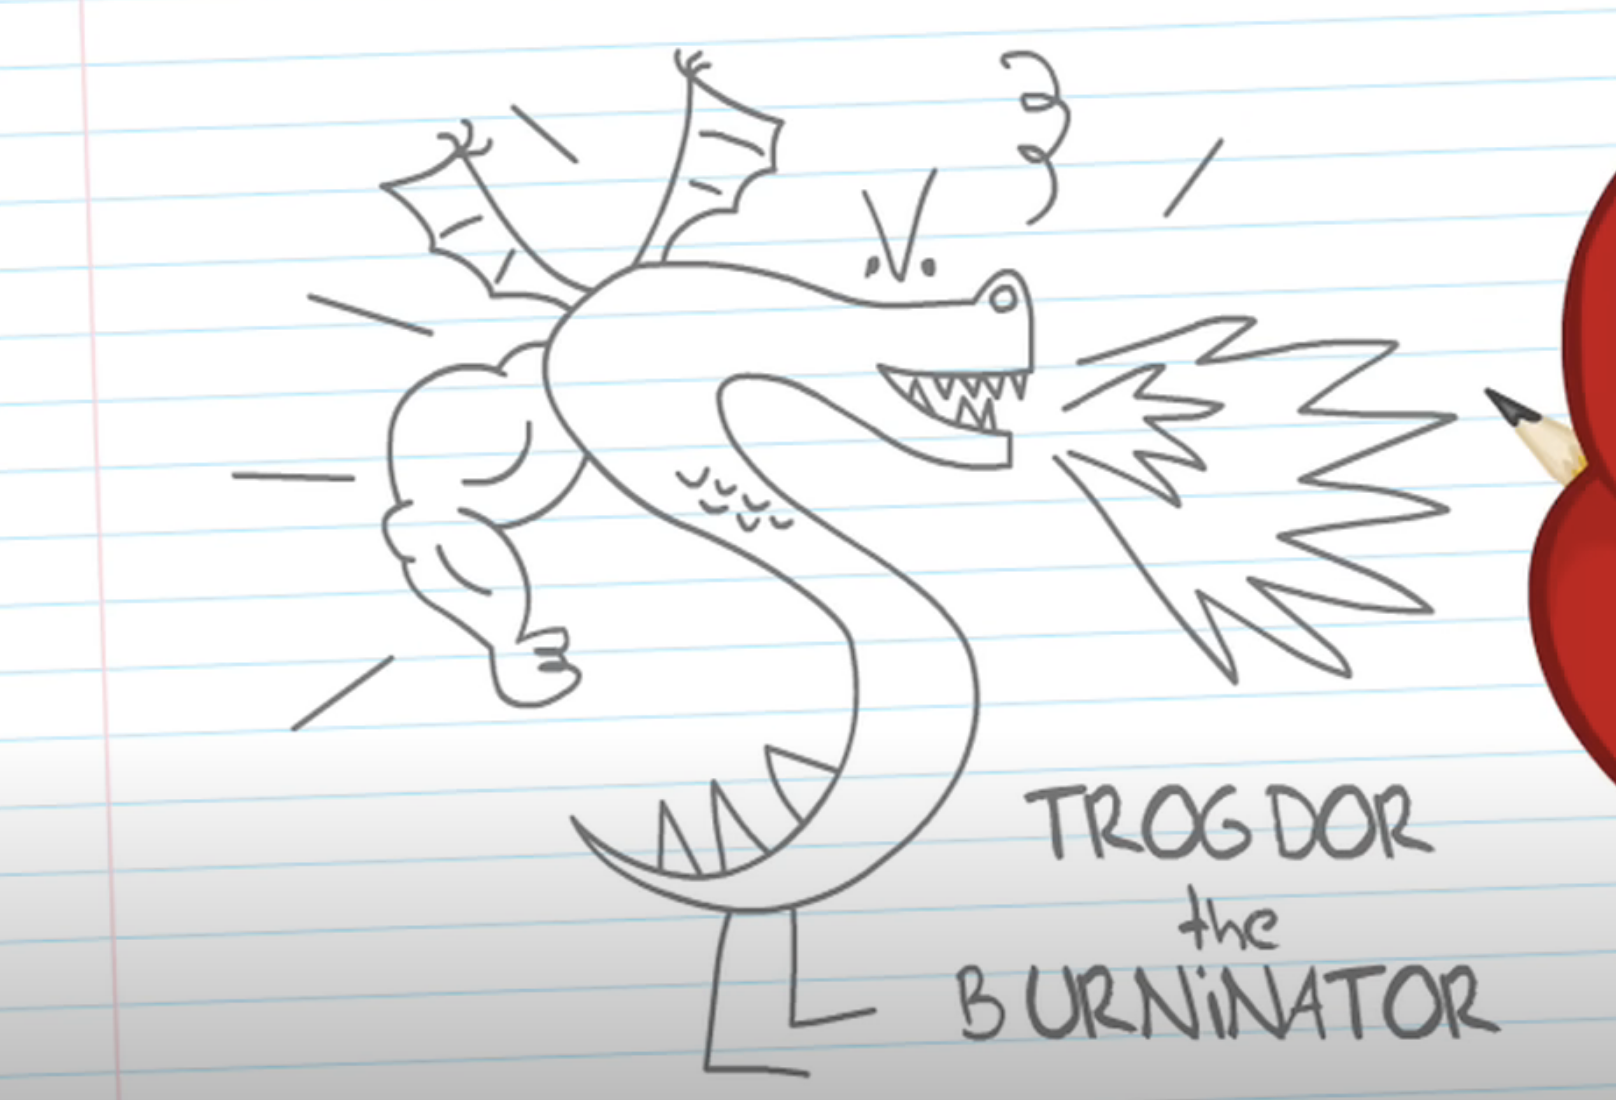 House of the Dragon S2E4 recap picture with Trogdor the Burninator (pencil sketch of a dragon with beefy arms)